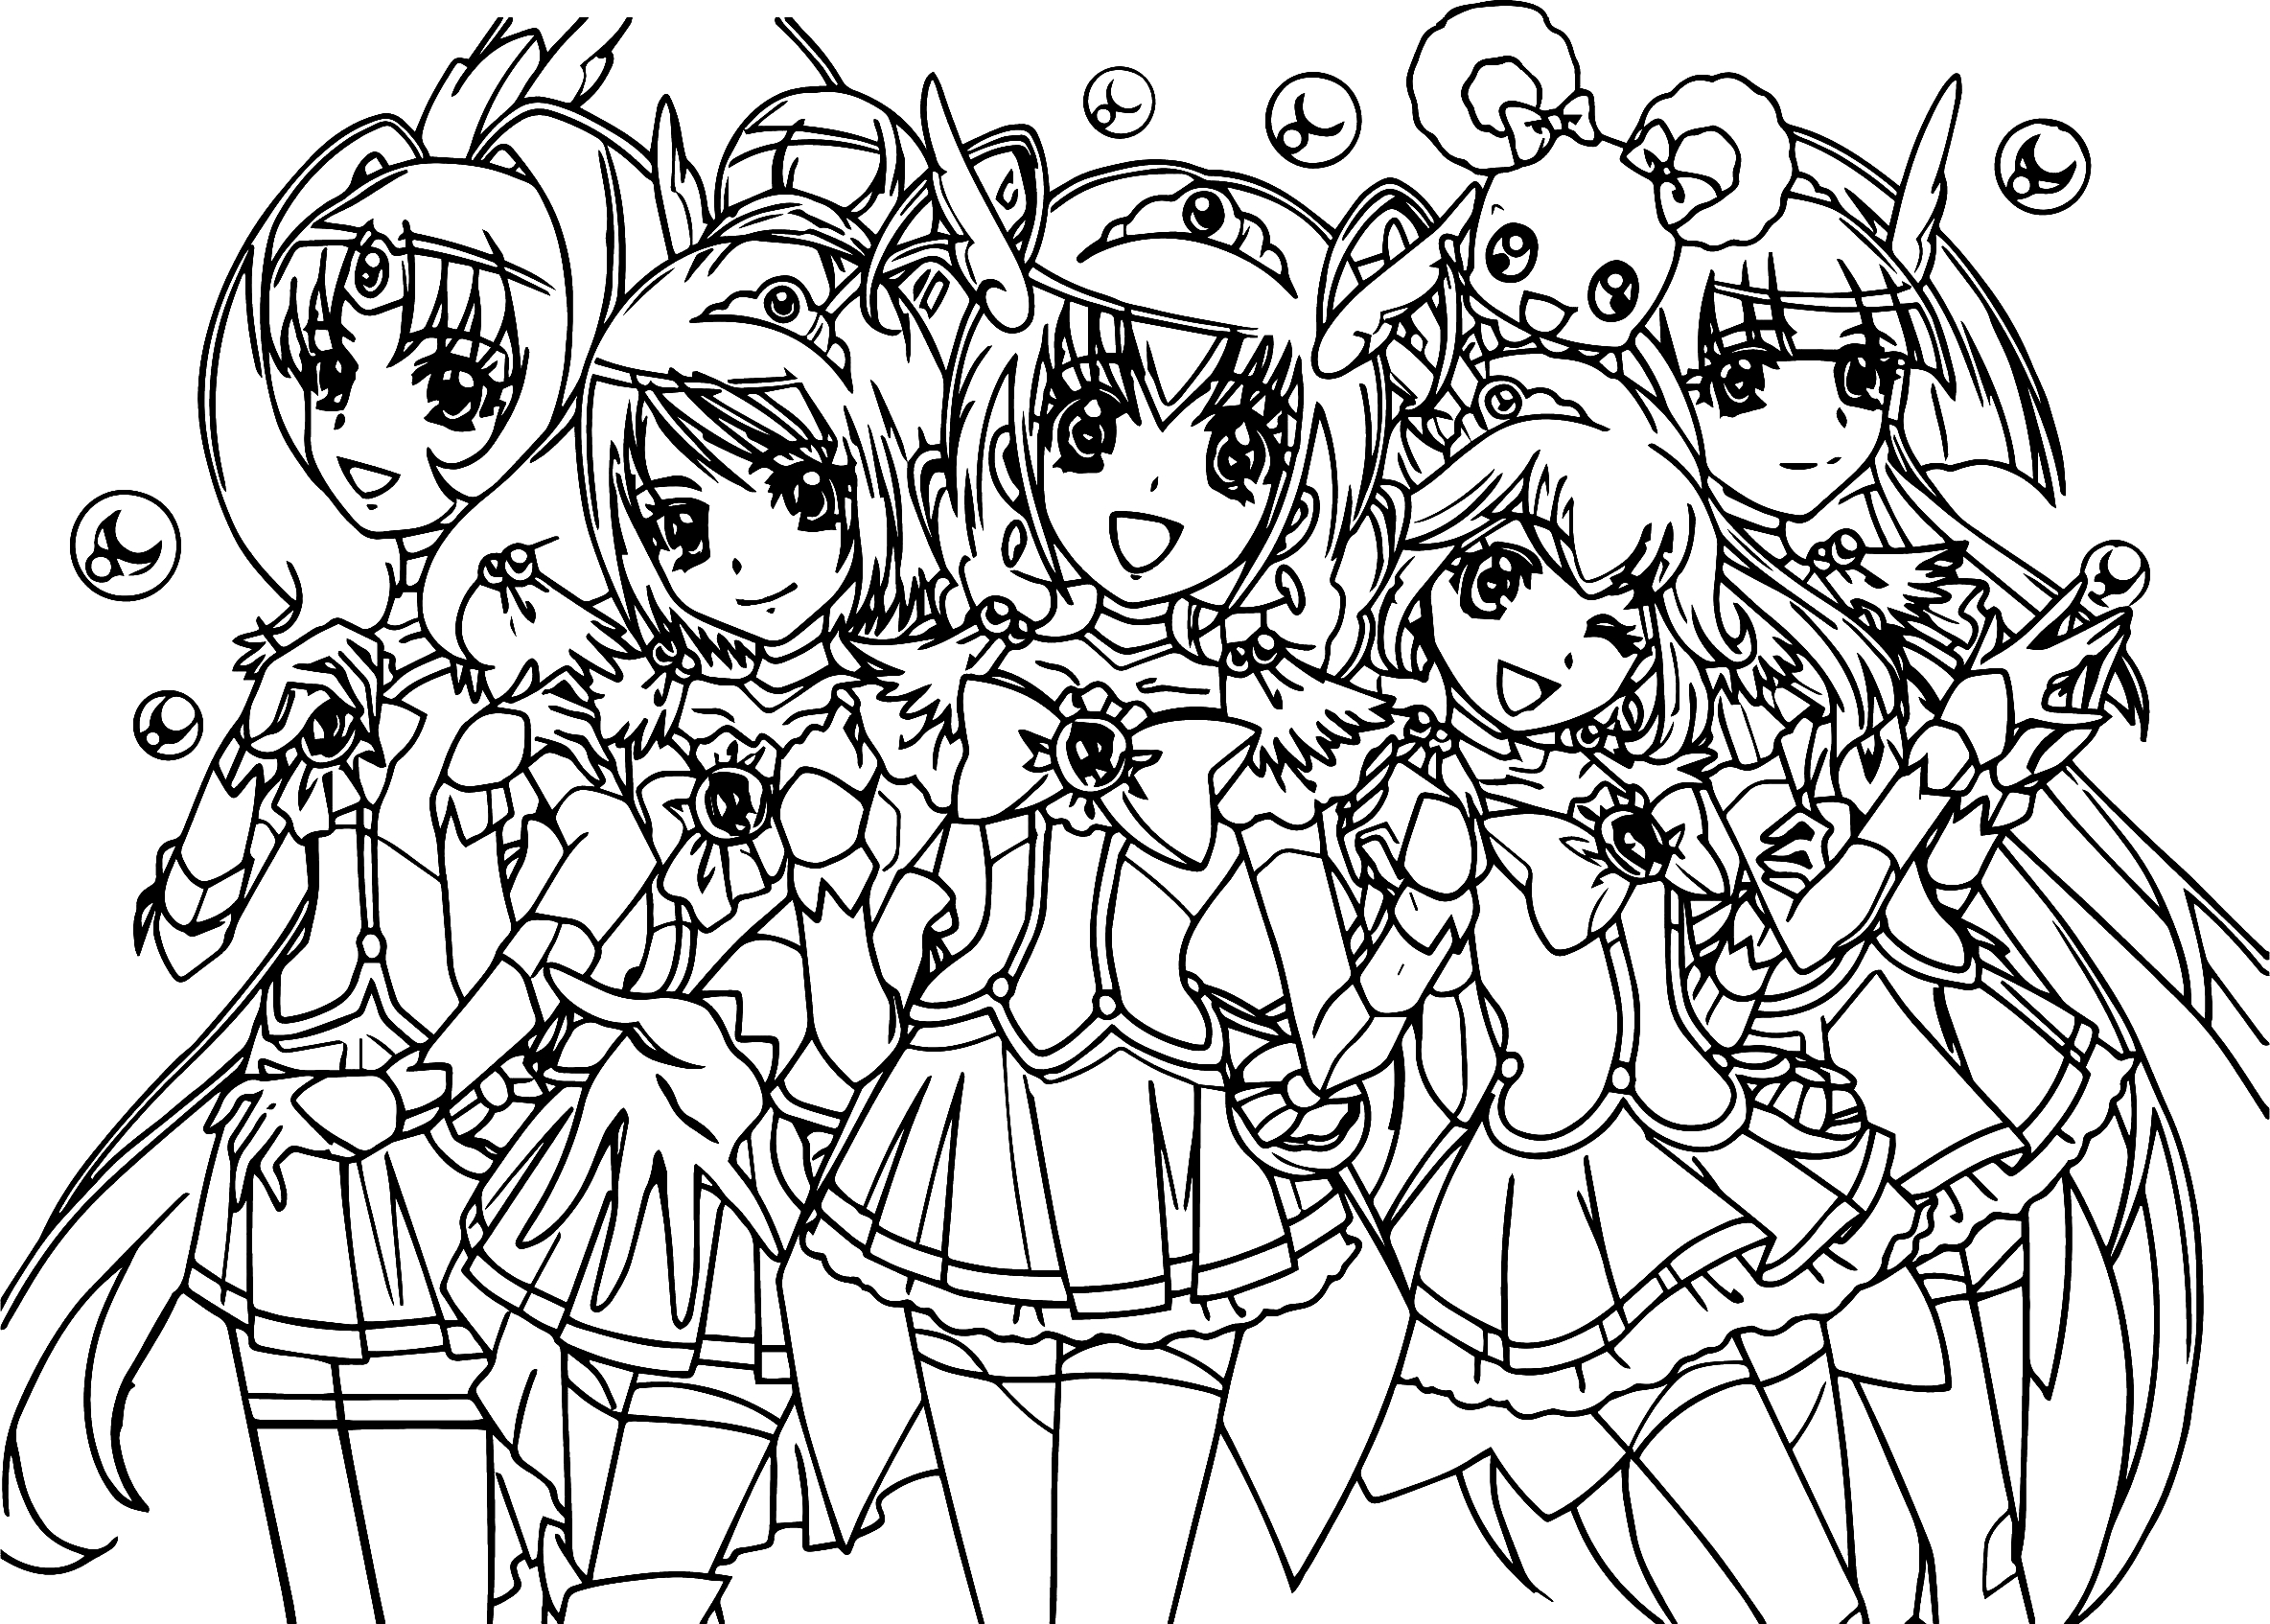 Glitter Force 9 coloring page to print and color